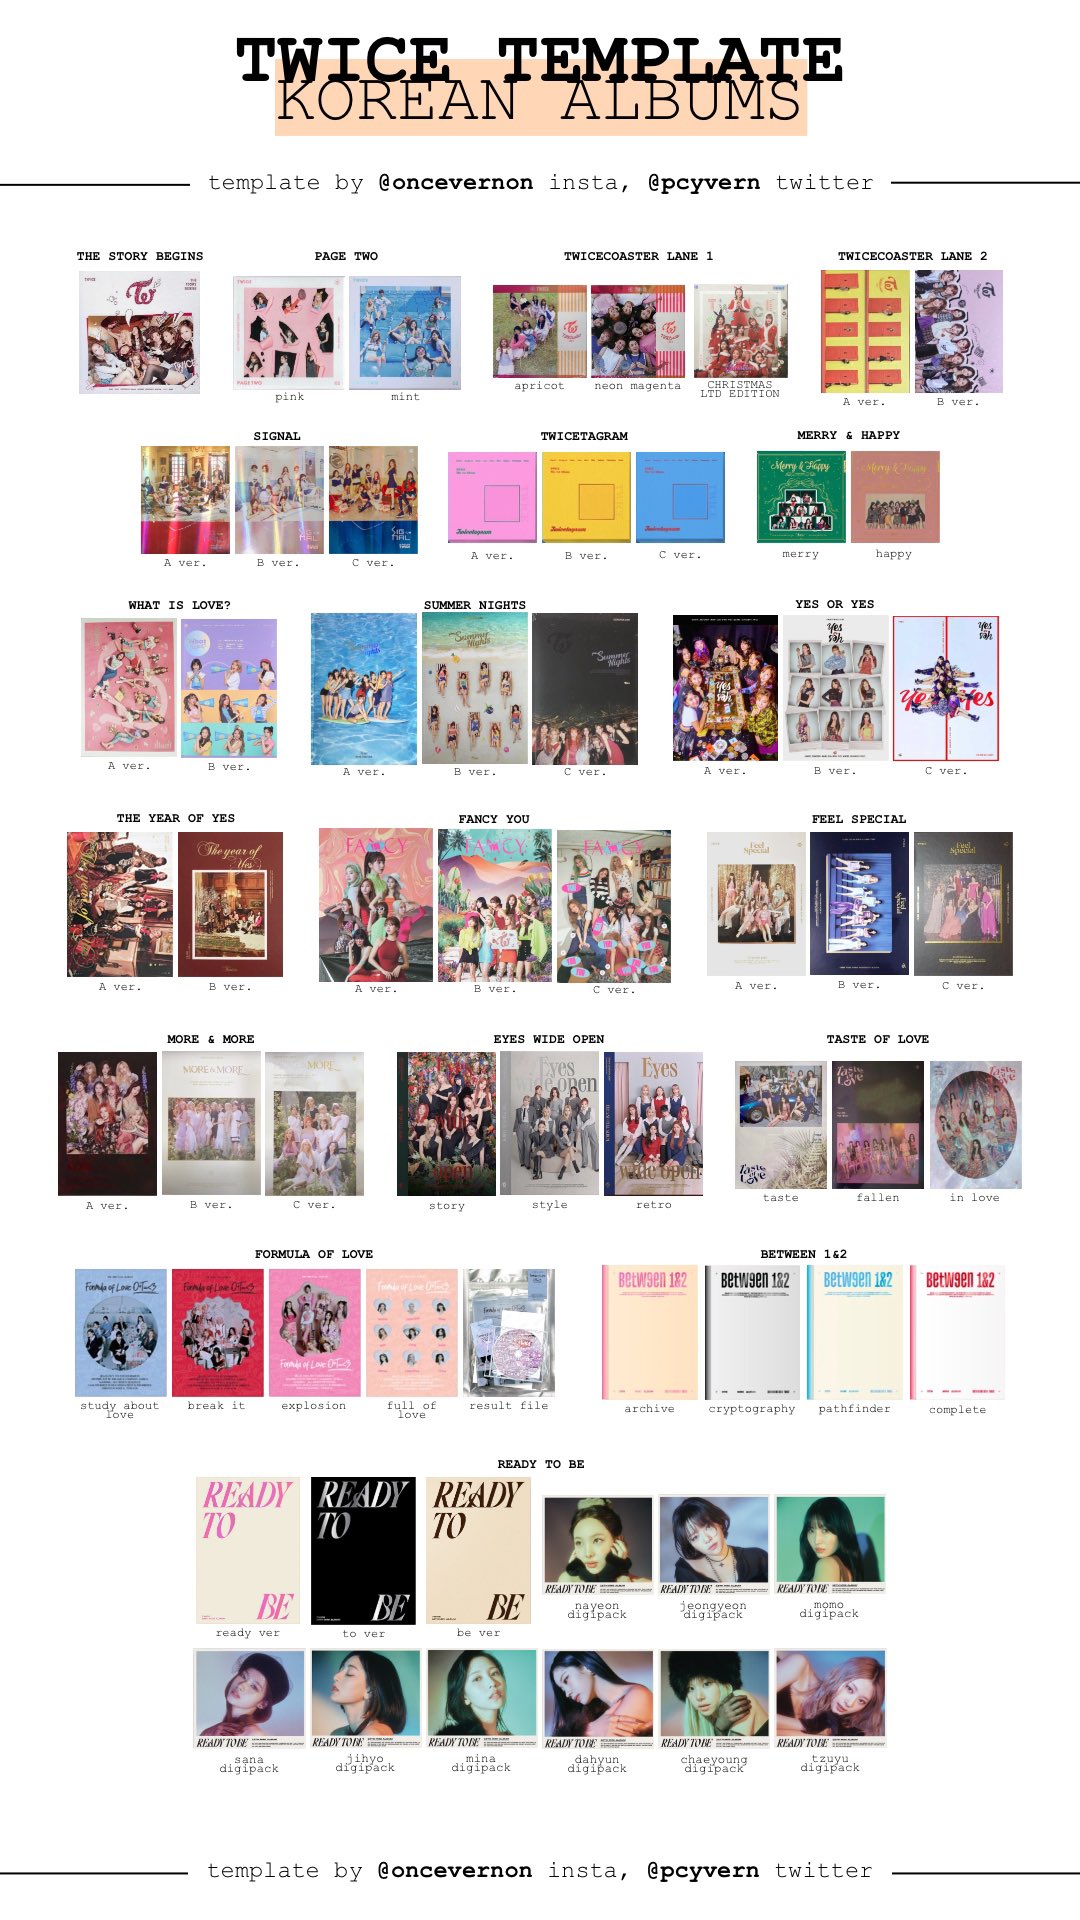 bella on X: update to the twice korean album covers template with